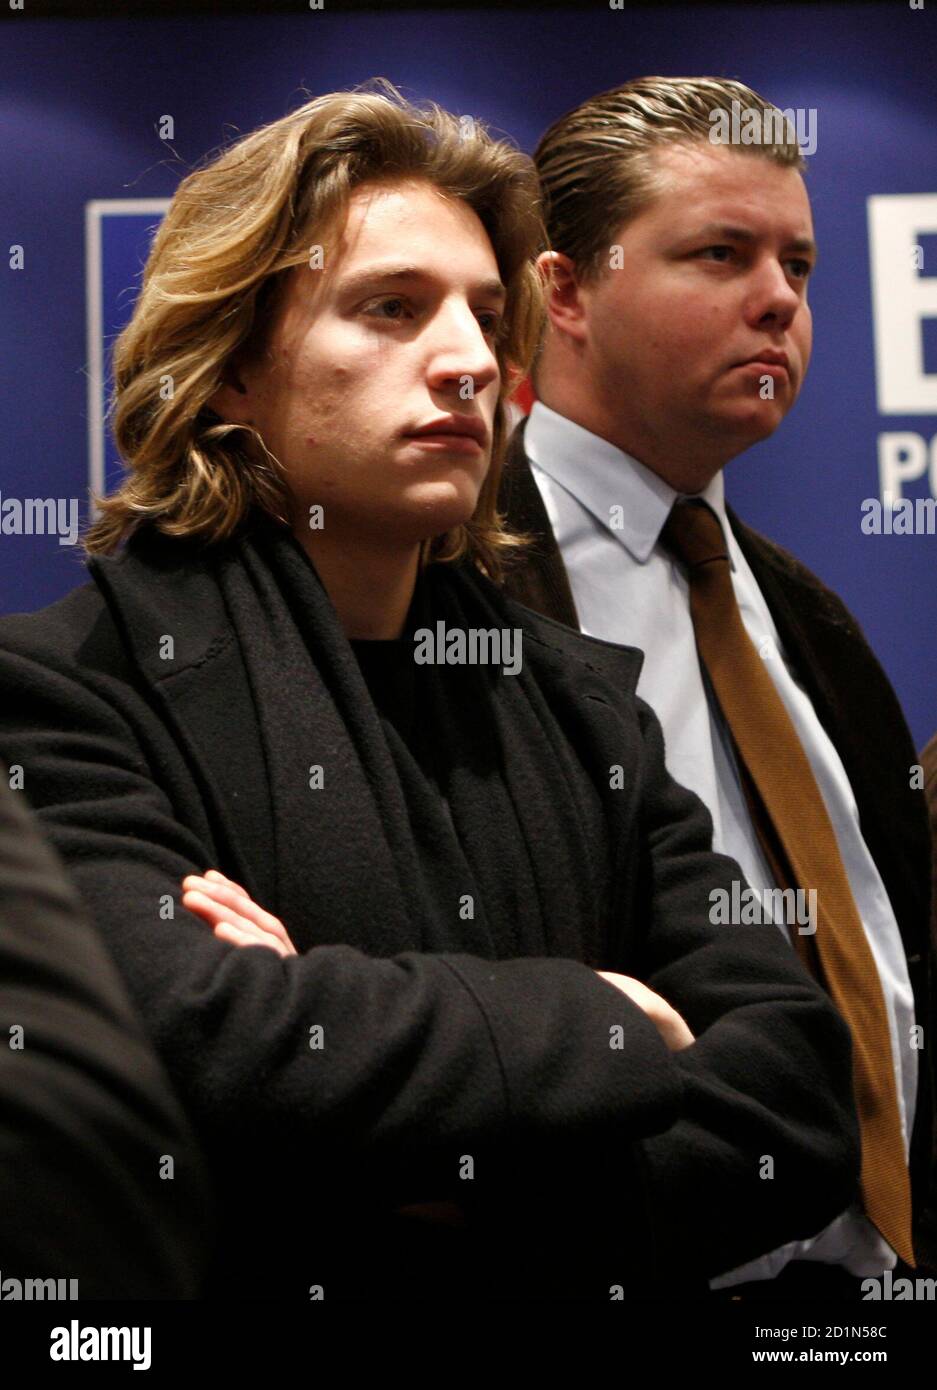 Jean Sarkozy (L) son of France's President Nicolas Sarkozy, attends an  official statement at the UMP headquarters in Paris February 12, 2008. Jean-Christophe  Fromantin got the support of UMP as candidate to